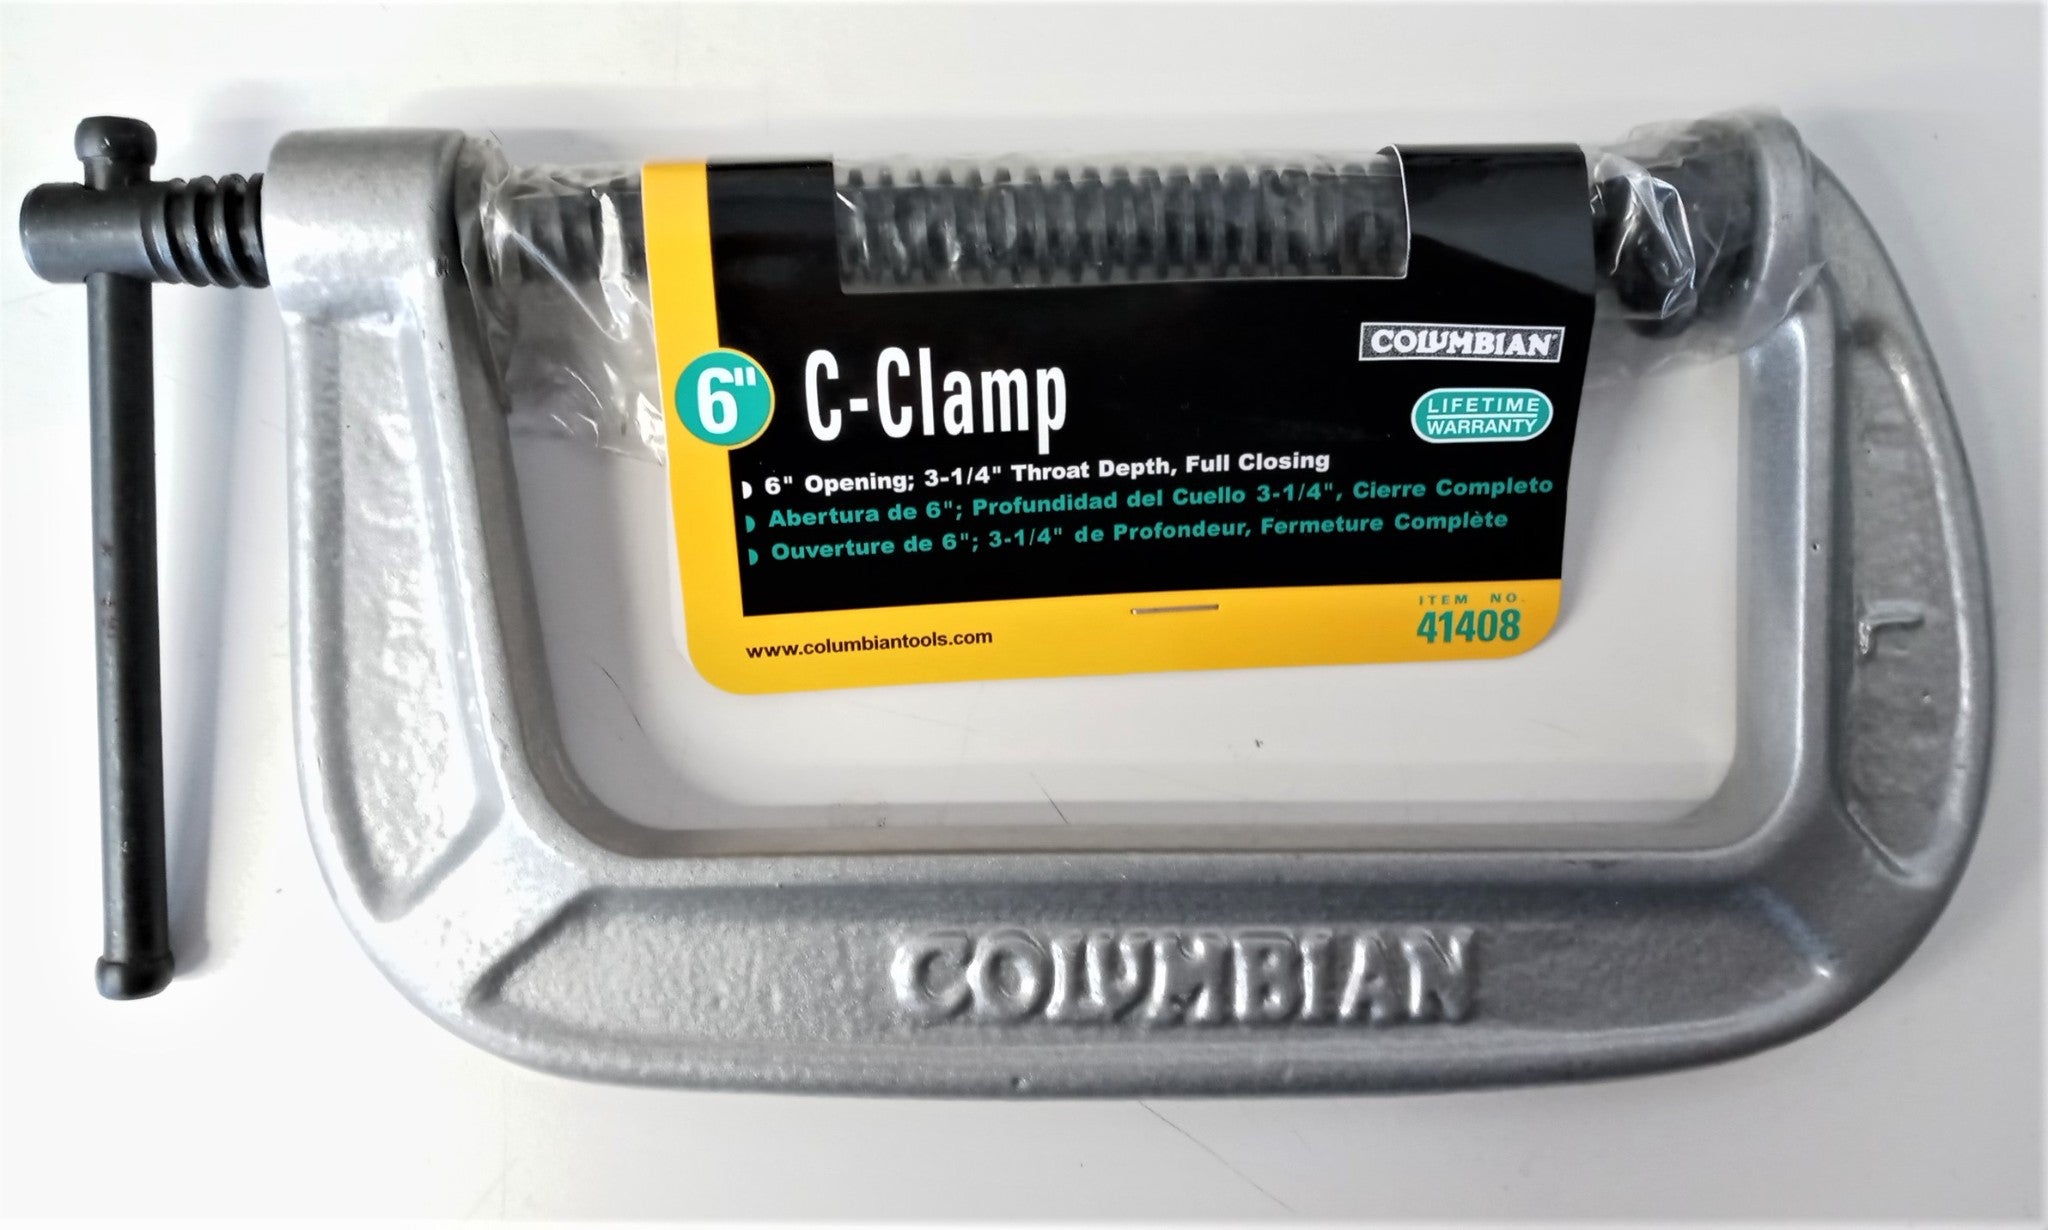 Columbian 41408 Carriage C-Clamp 6" Opening